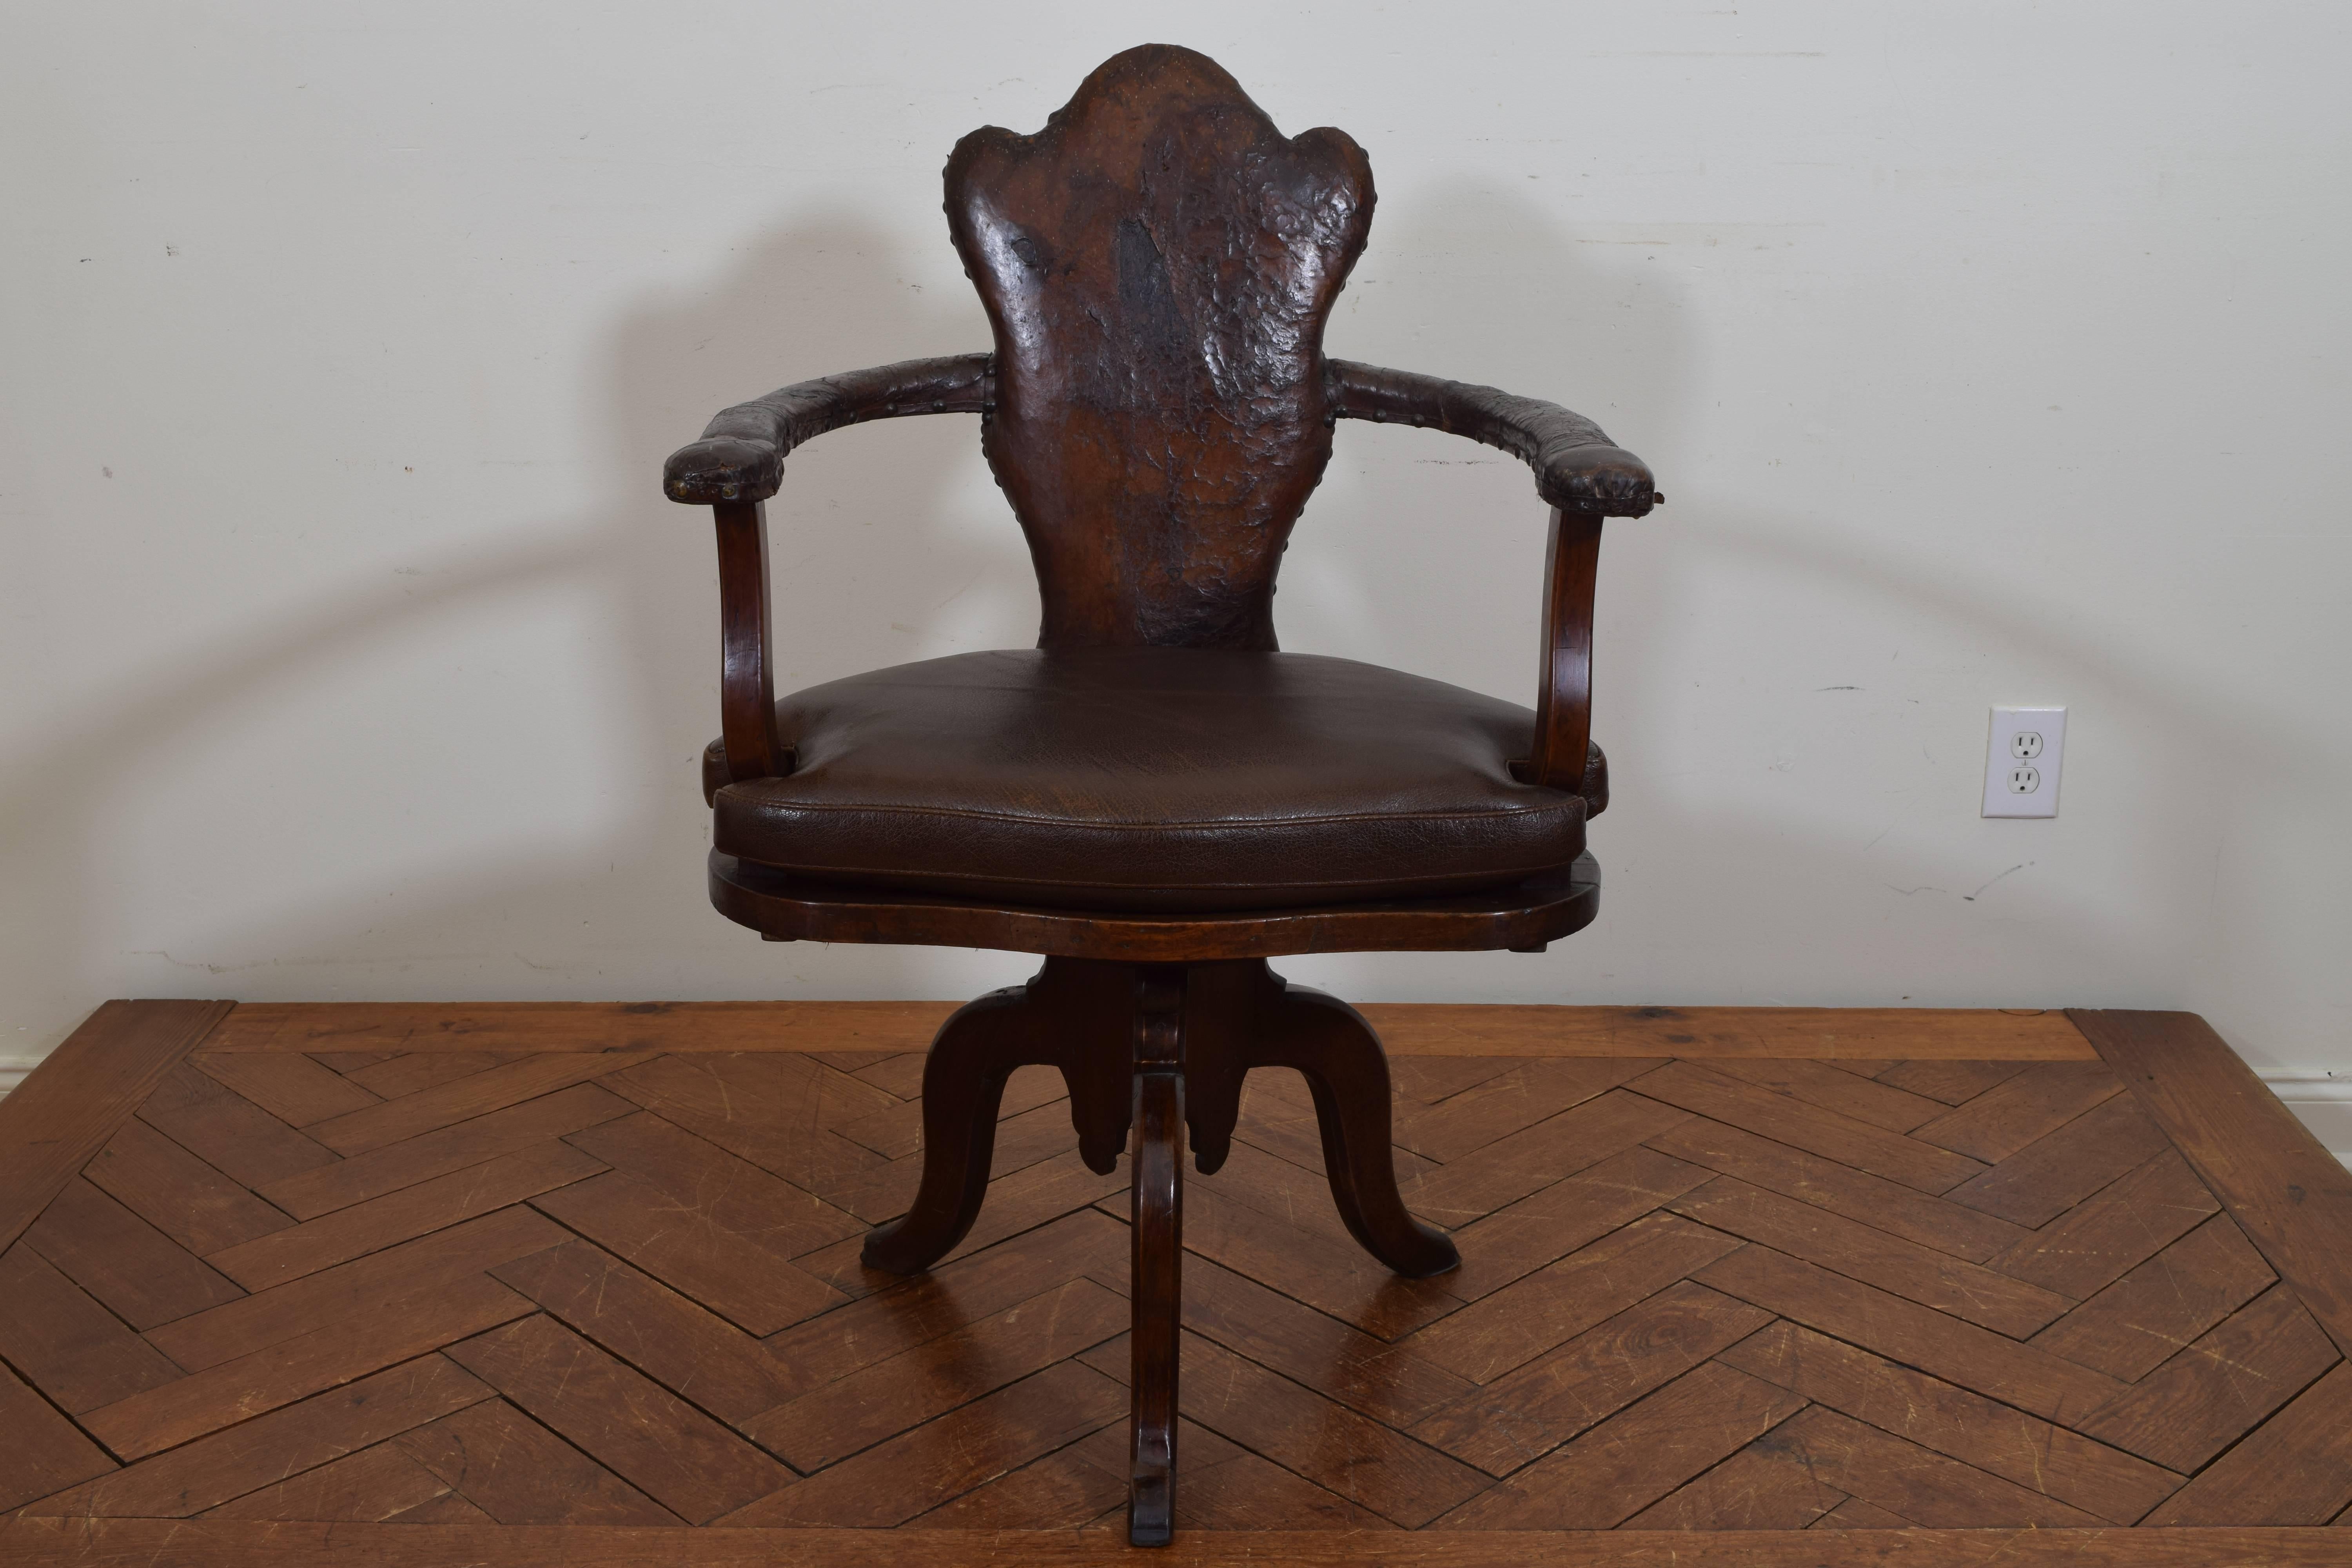 Having a shaped backrest and U-shaped arms raised on shaped supports, all upholstered in antique leather and trimmed in nailheads, the generous seat upholstered in a new leather hide and resting atop a round swiveling deck sitting above a carved